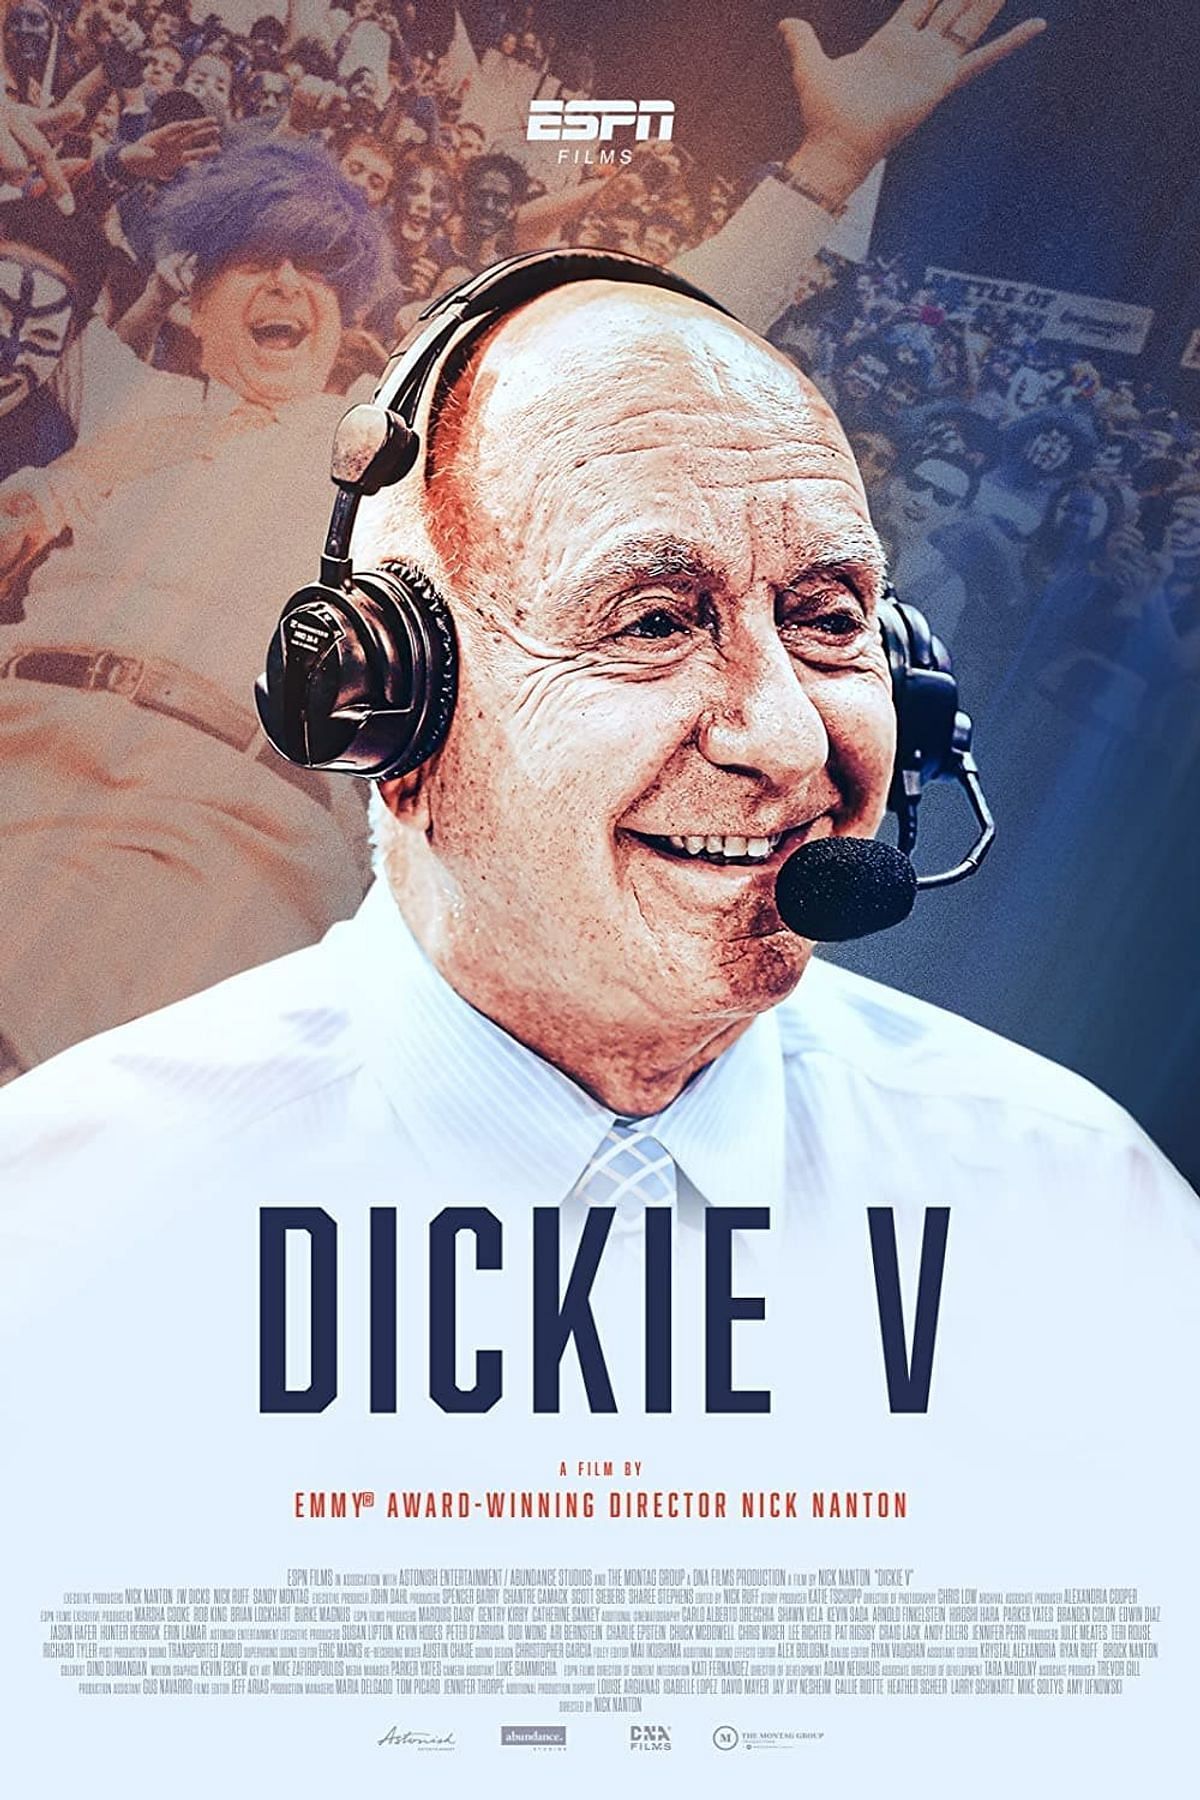 A promotional poster Dickie V, which is one of the highly anticipated documentaries releasing this week (Image via ESPN)